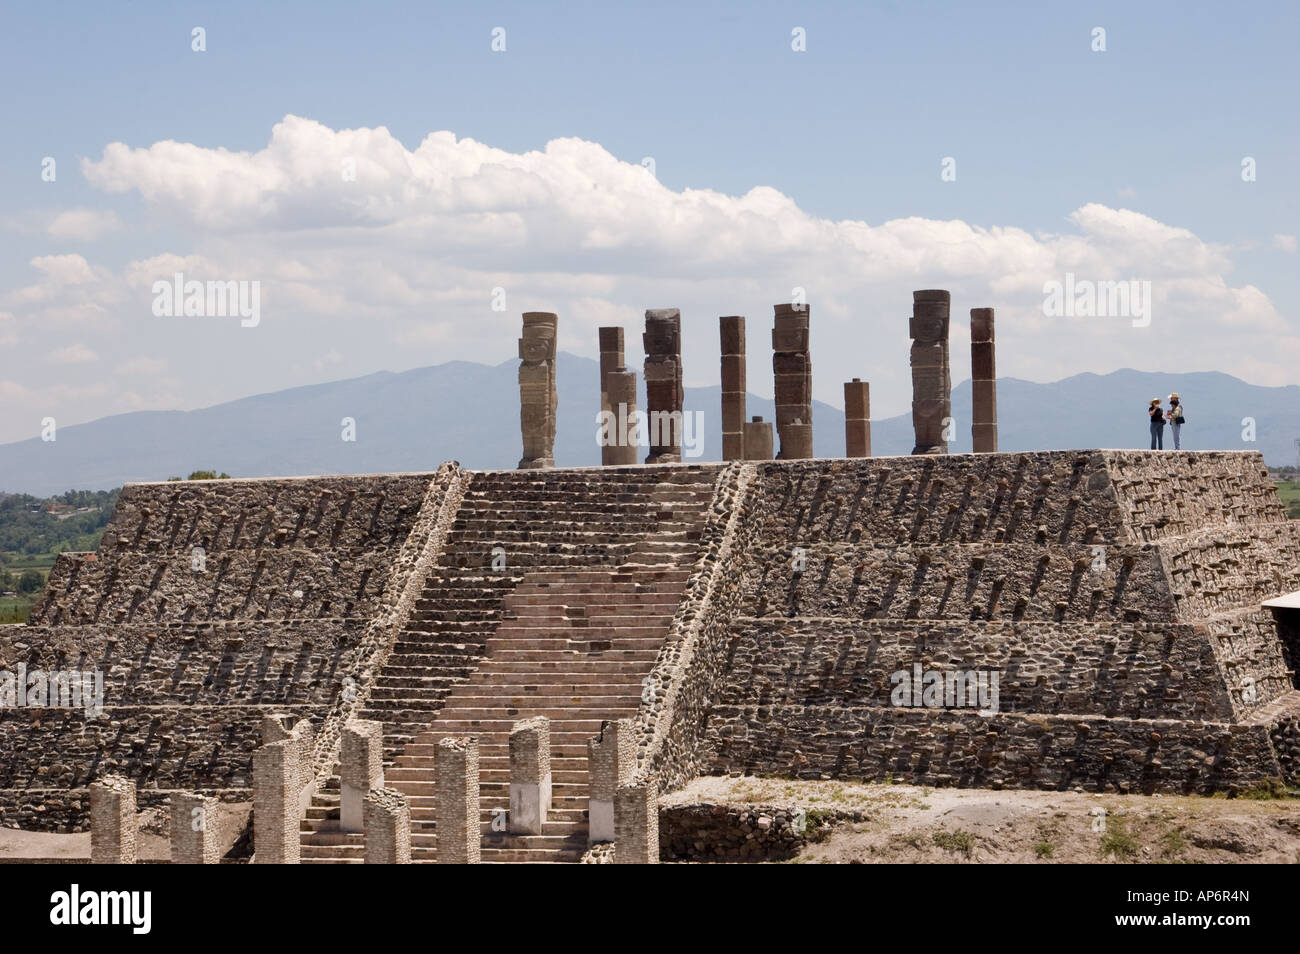 The ruins of an ancient mesoamerican city from the Toltec empire in Tula Mexico Stock Photo